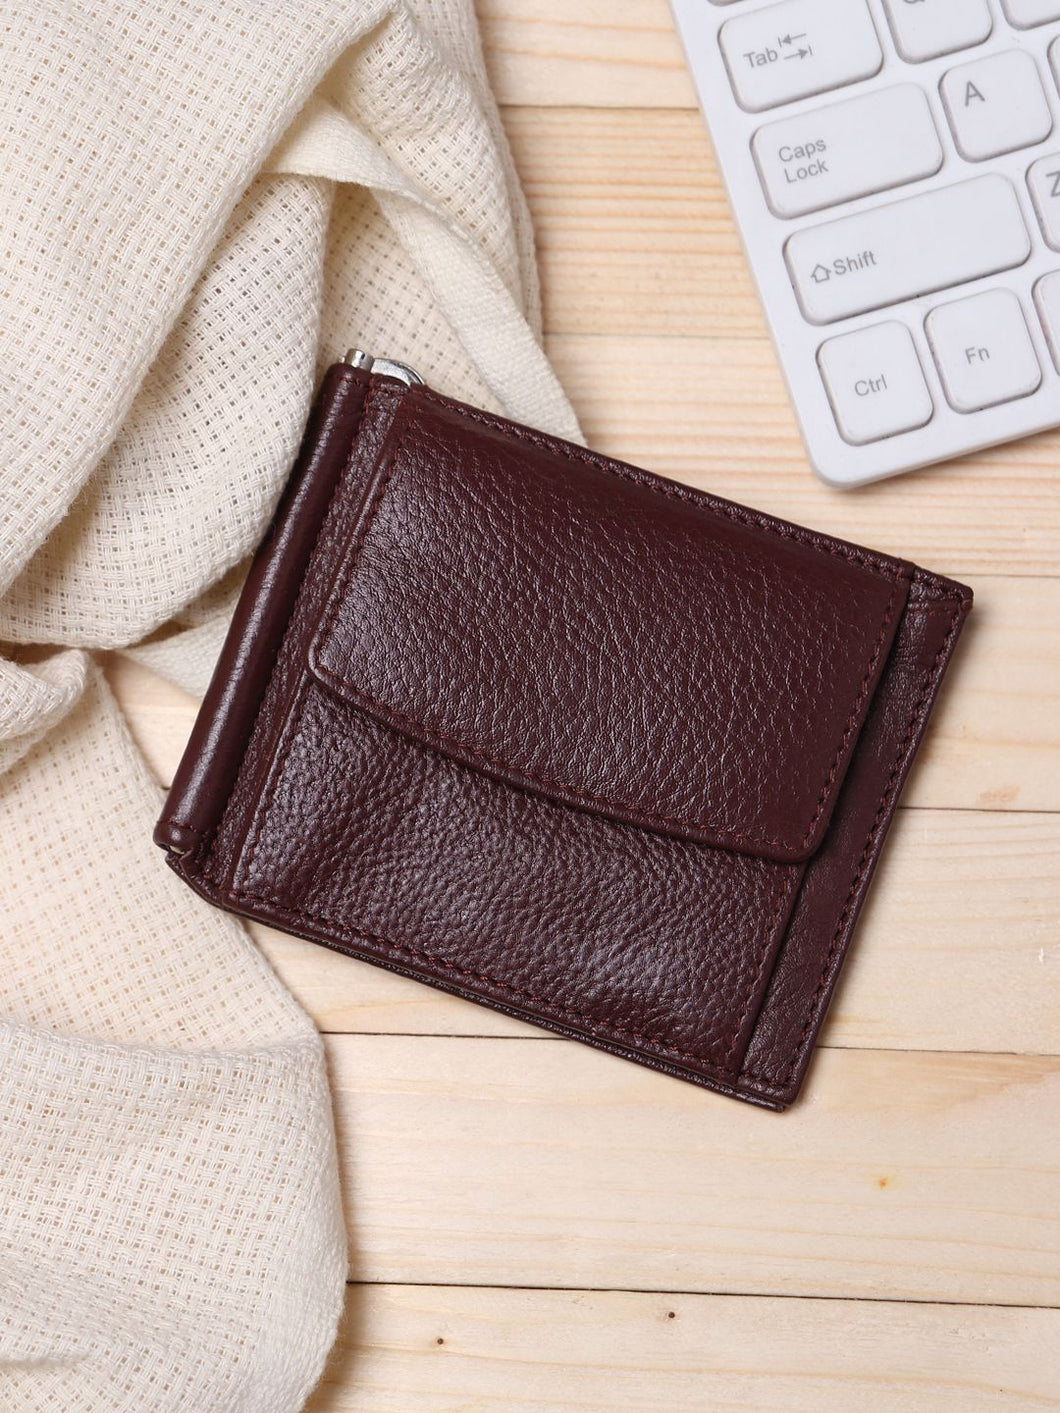 Vintage Mens Wallet With No Zipper Business Case, Bank Card Holder, Money  Clip, Ticket Holder And Mens Leather Money Purse From Kovichh, $9.51 |  DHgate.Com